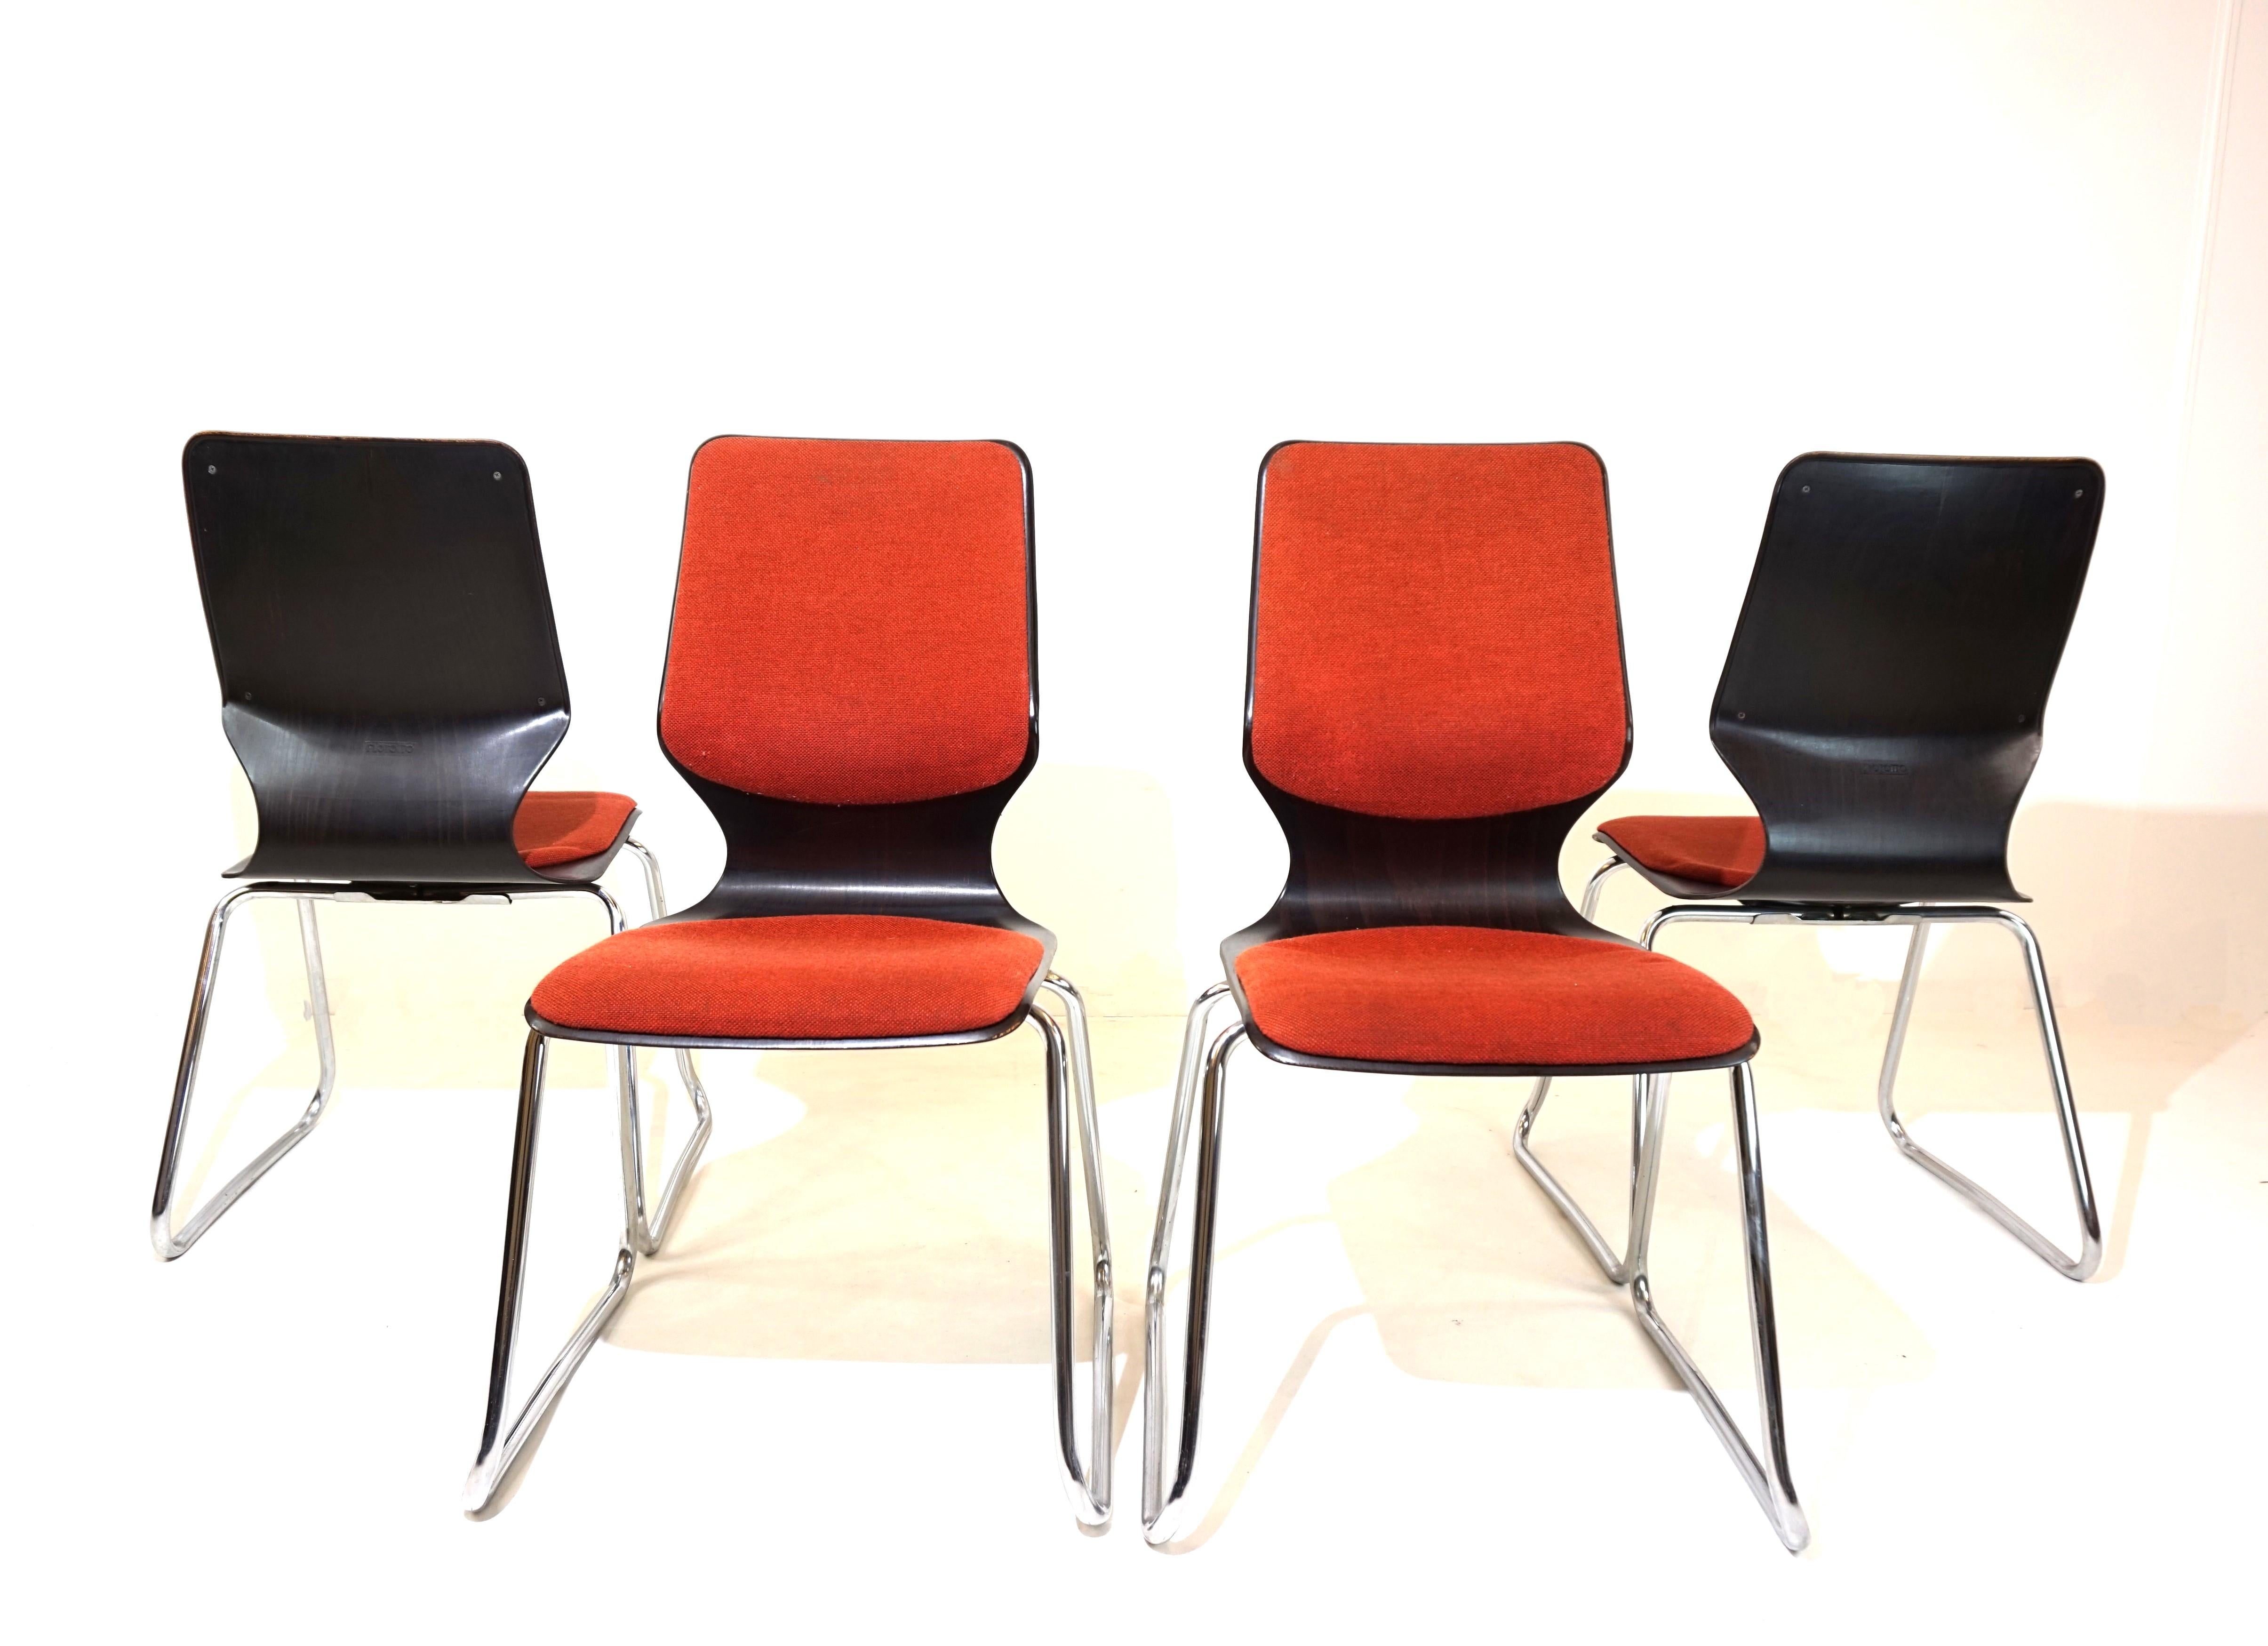 A set of 4 Flötotto chairs in the desired design with a high backrest and upholstered seat and back shell. These chairs enable very comfortable sitting in conjunction with a design icon. The Pagholz bowls are in perfect condition. The seat cushions